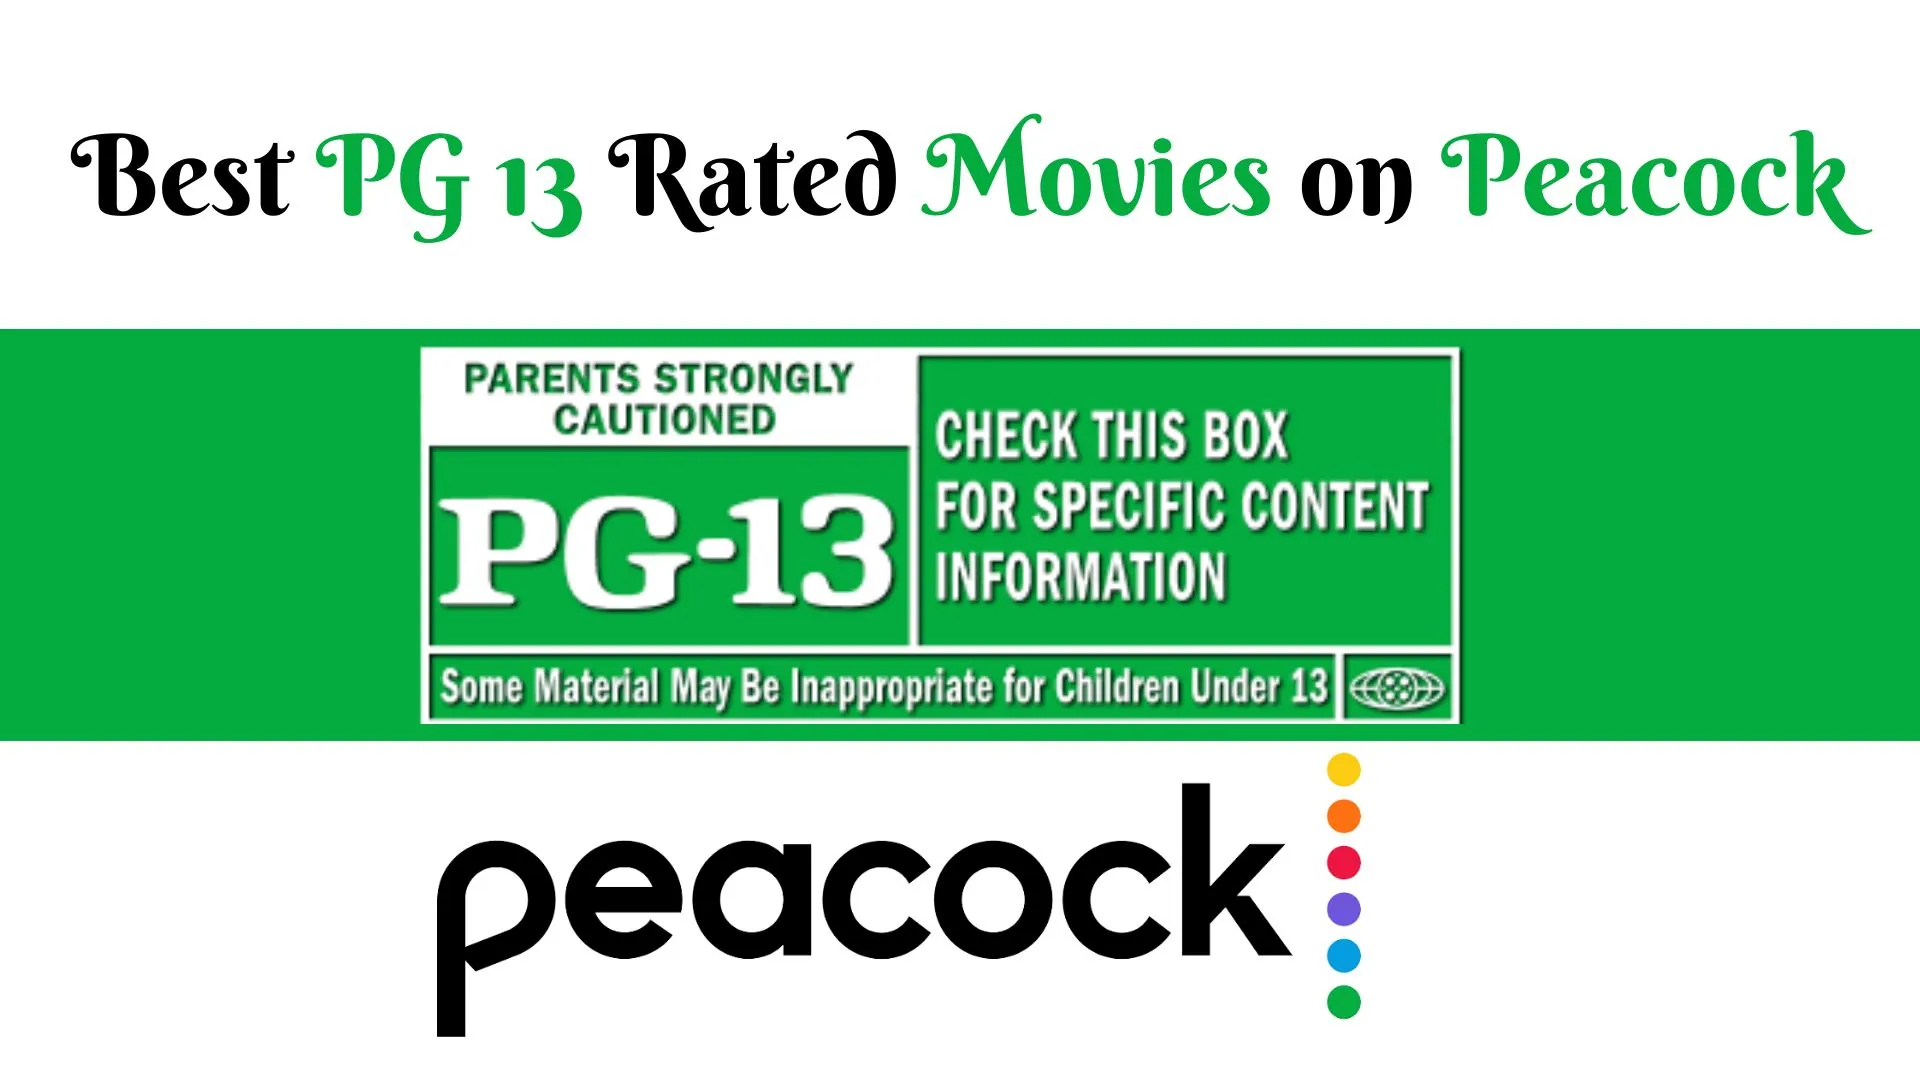 Best PG 13 Rated Movies on Peacock